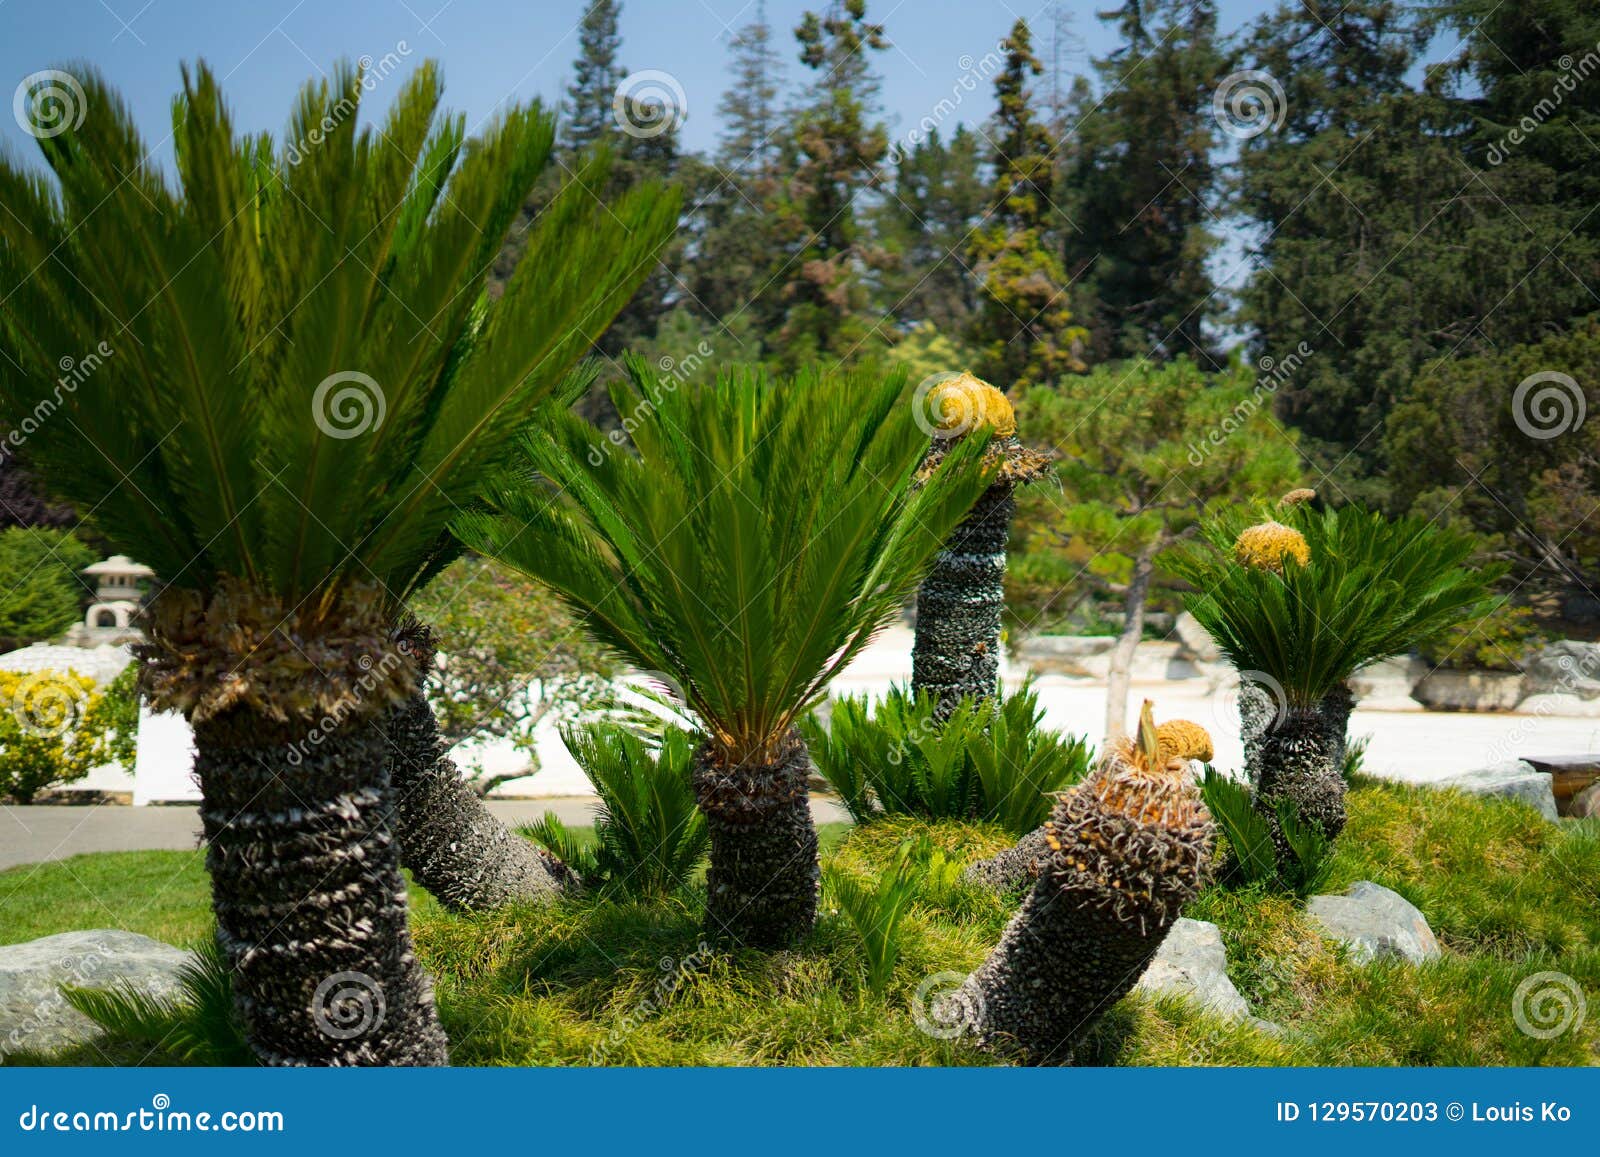 Sago Palm In Japanese Garden Stock Image Image Of Countryside